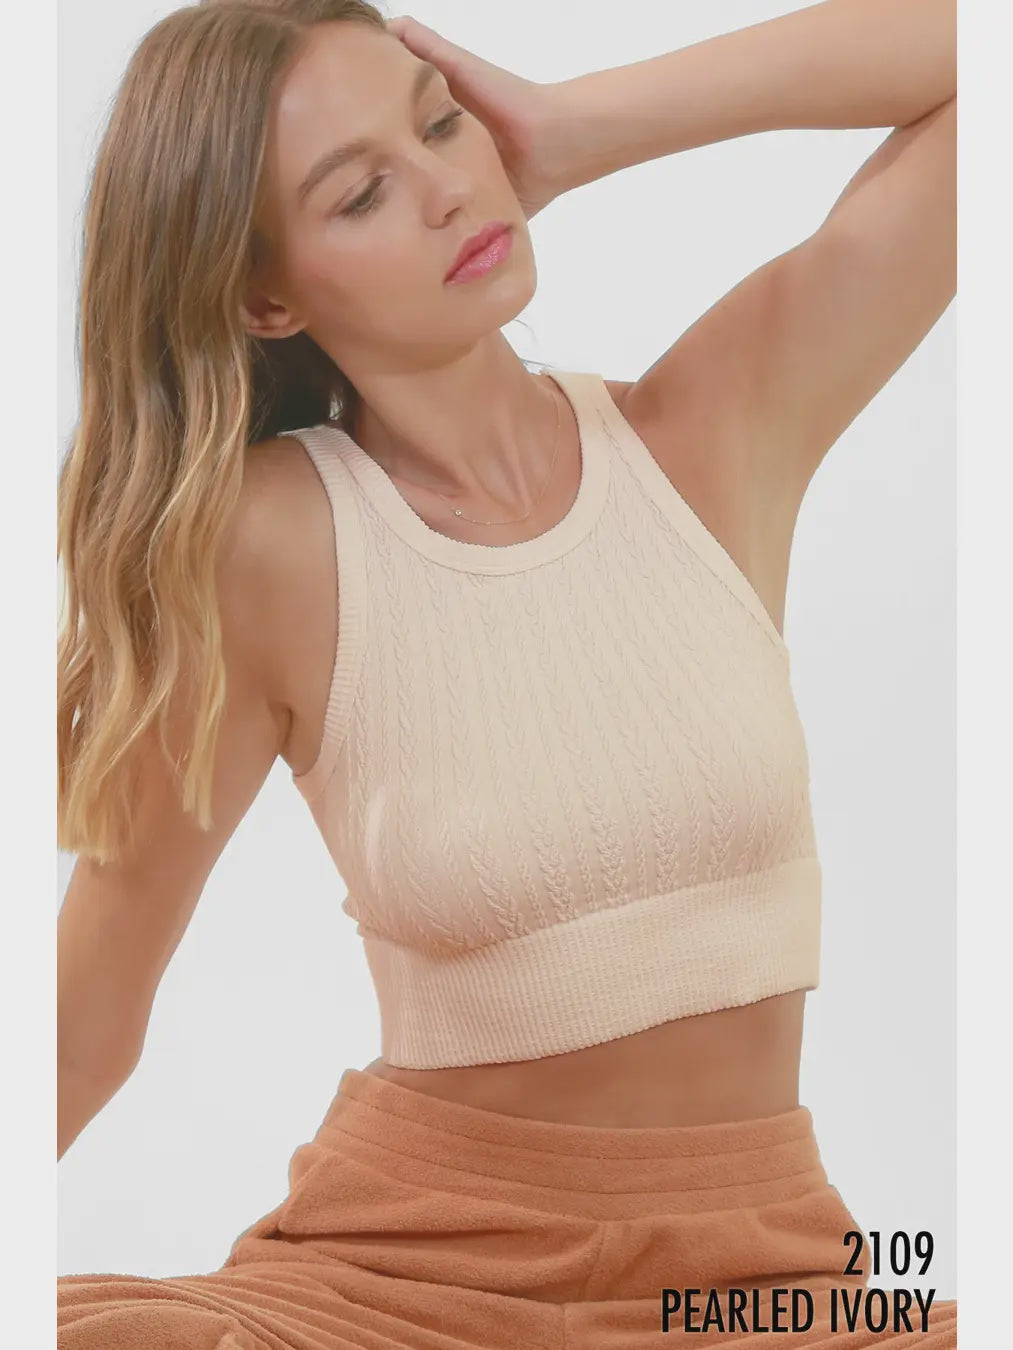 Cable Knit Crop Top - One Size - Pearled Ivory